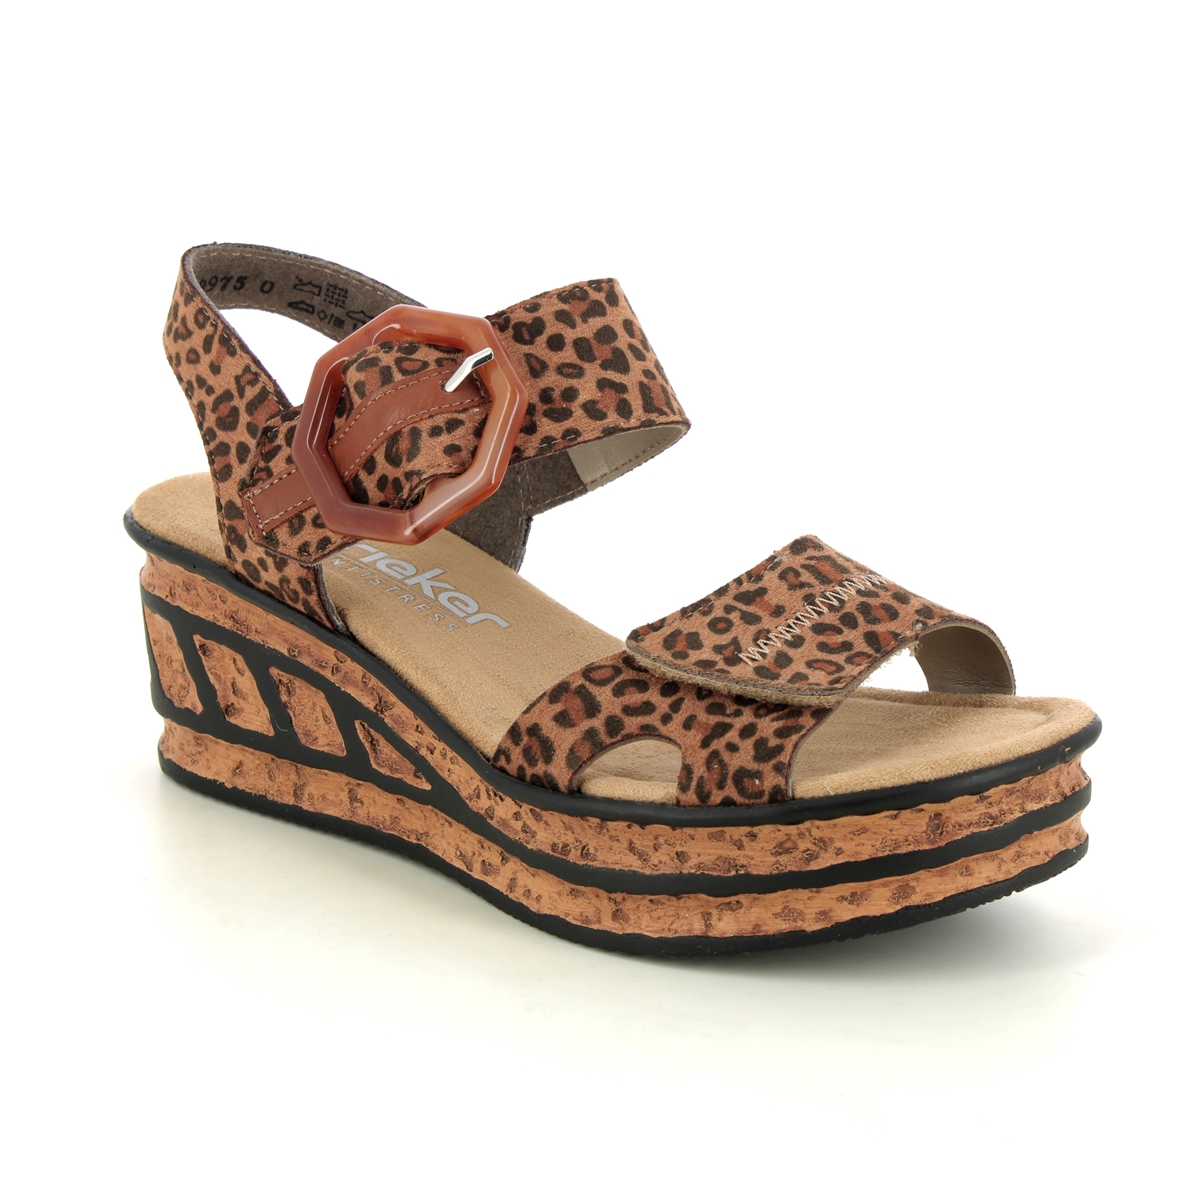 Rieker 68176-90 Leopard print Womens Wedge Sandals in a Plain Man-made in Size 38